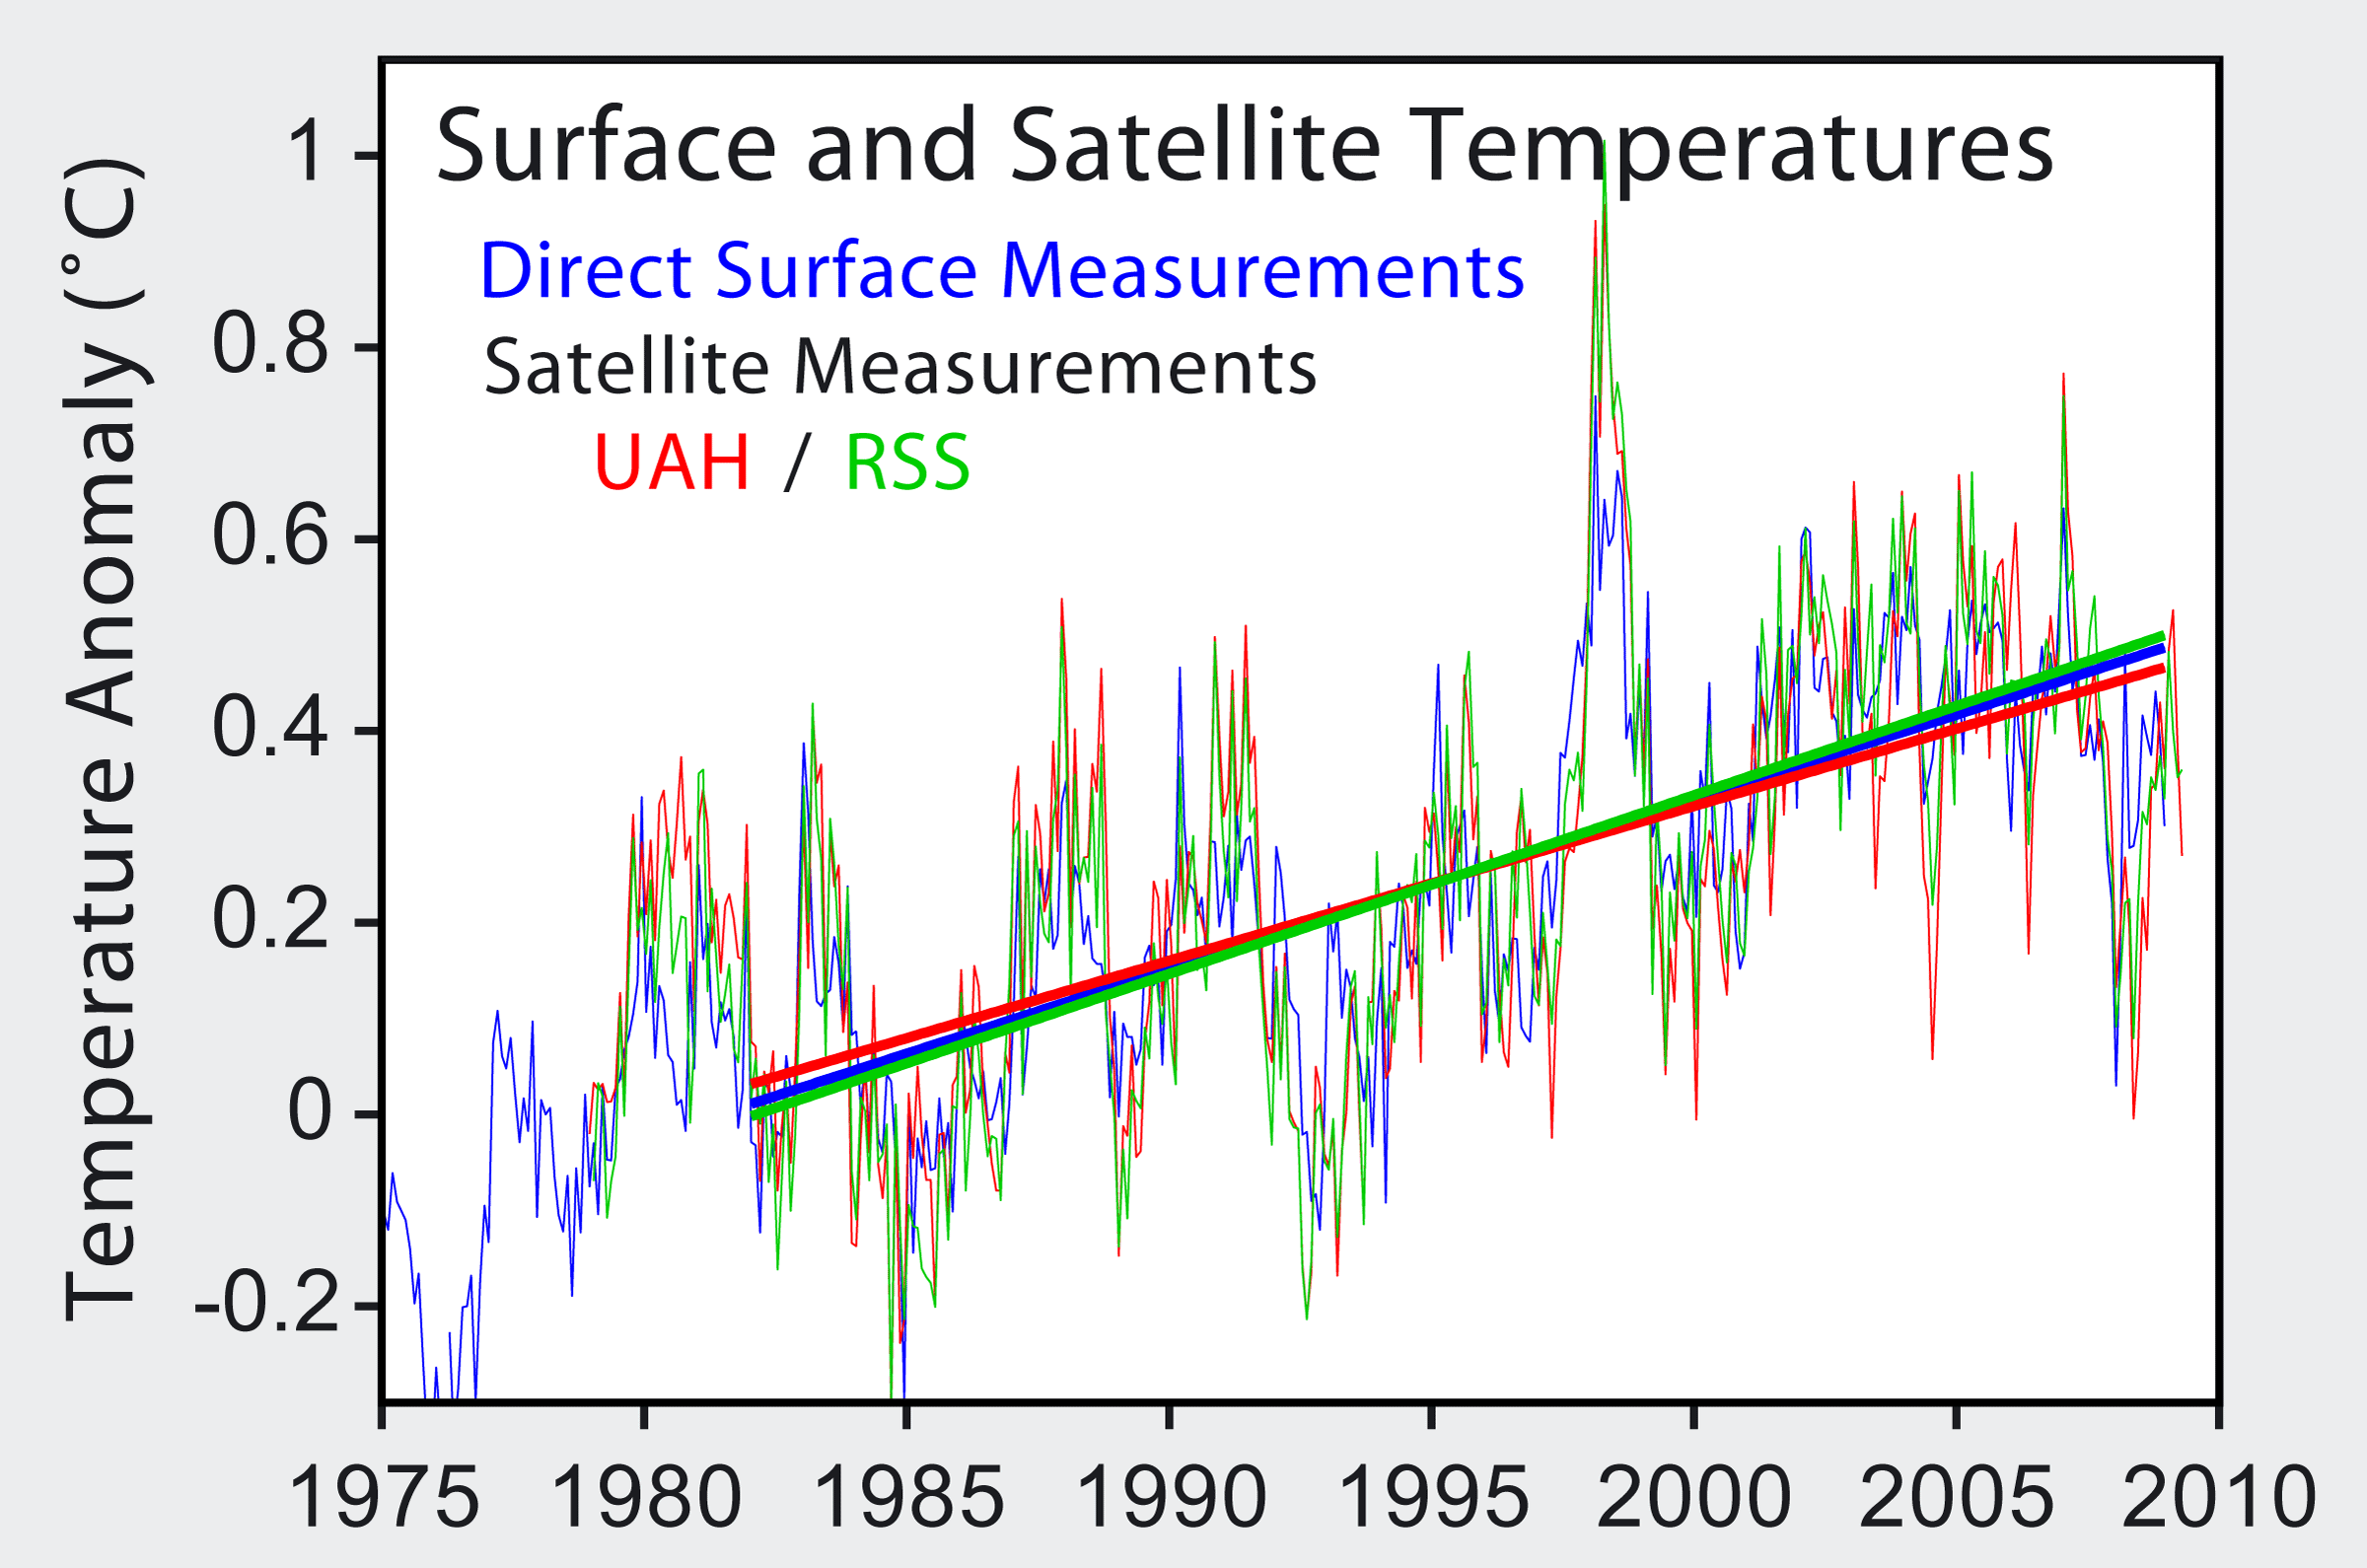 Temperature trends of the troposphere now match well with the surface based trend.